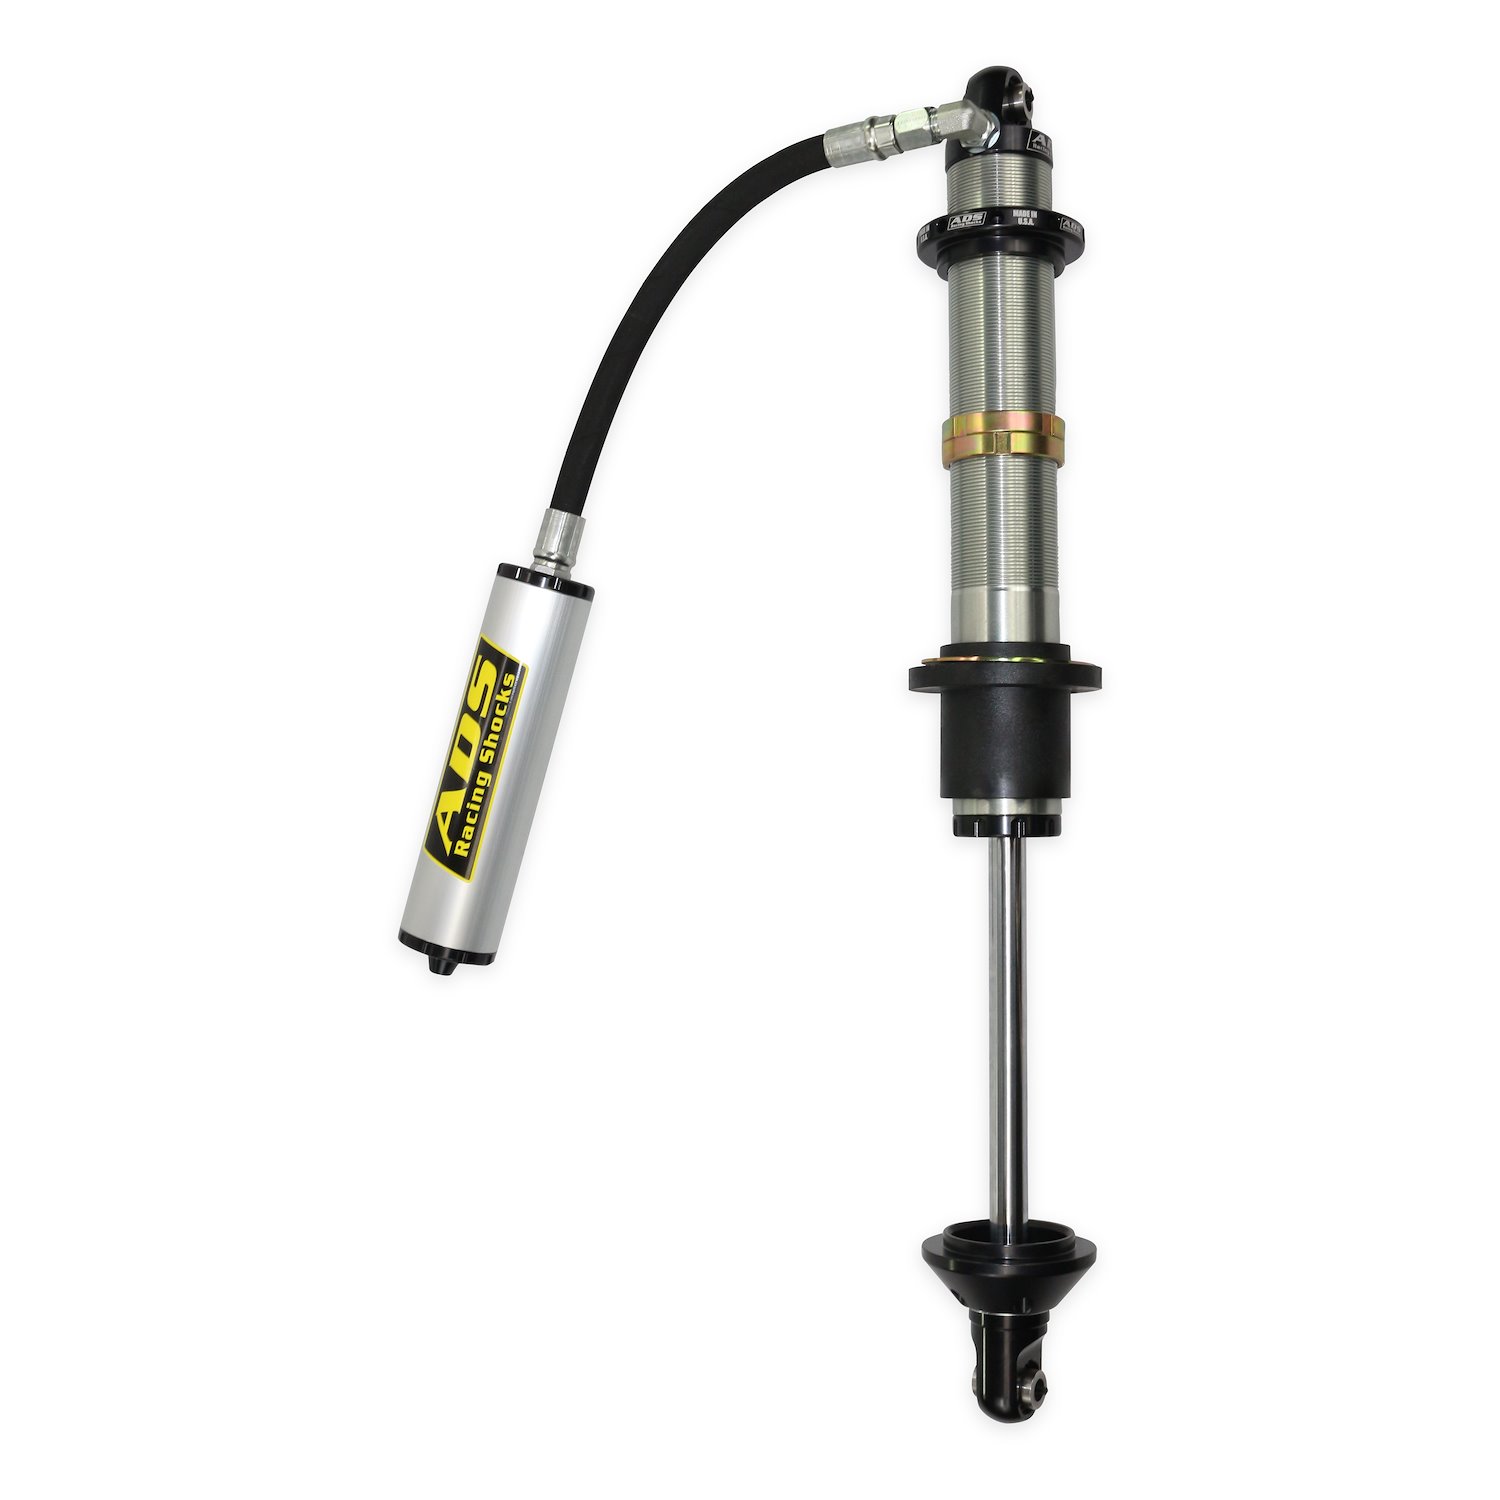 250-COR12-900 Coil-Over Race Shock, 2.5 in. x 12 in. Stroke, w/ Remote Reservoir (90-Degree Hose)